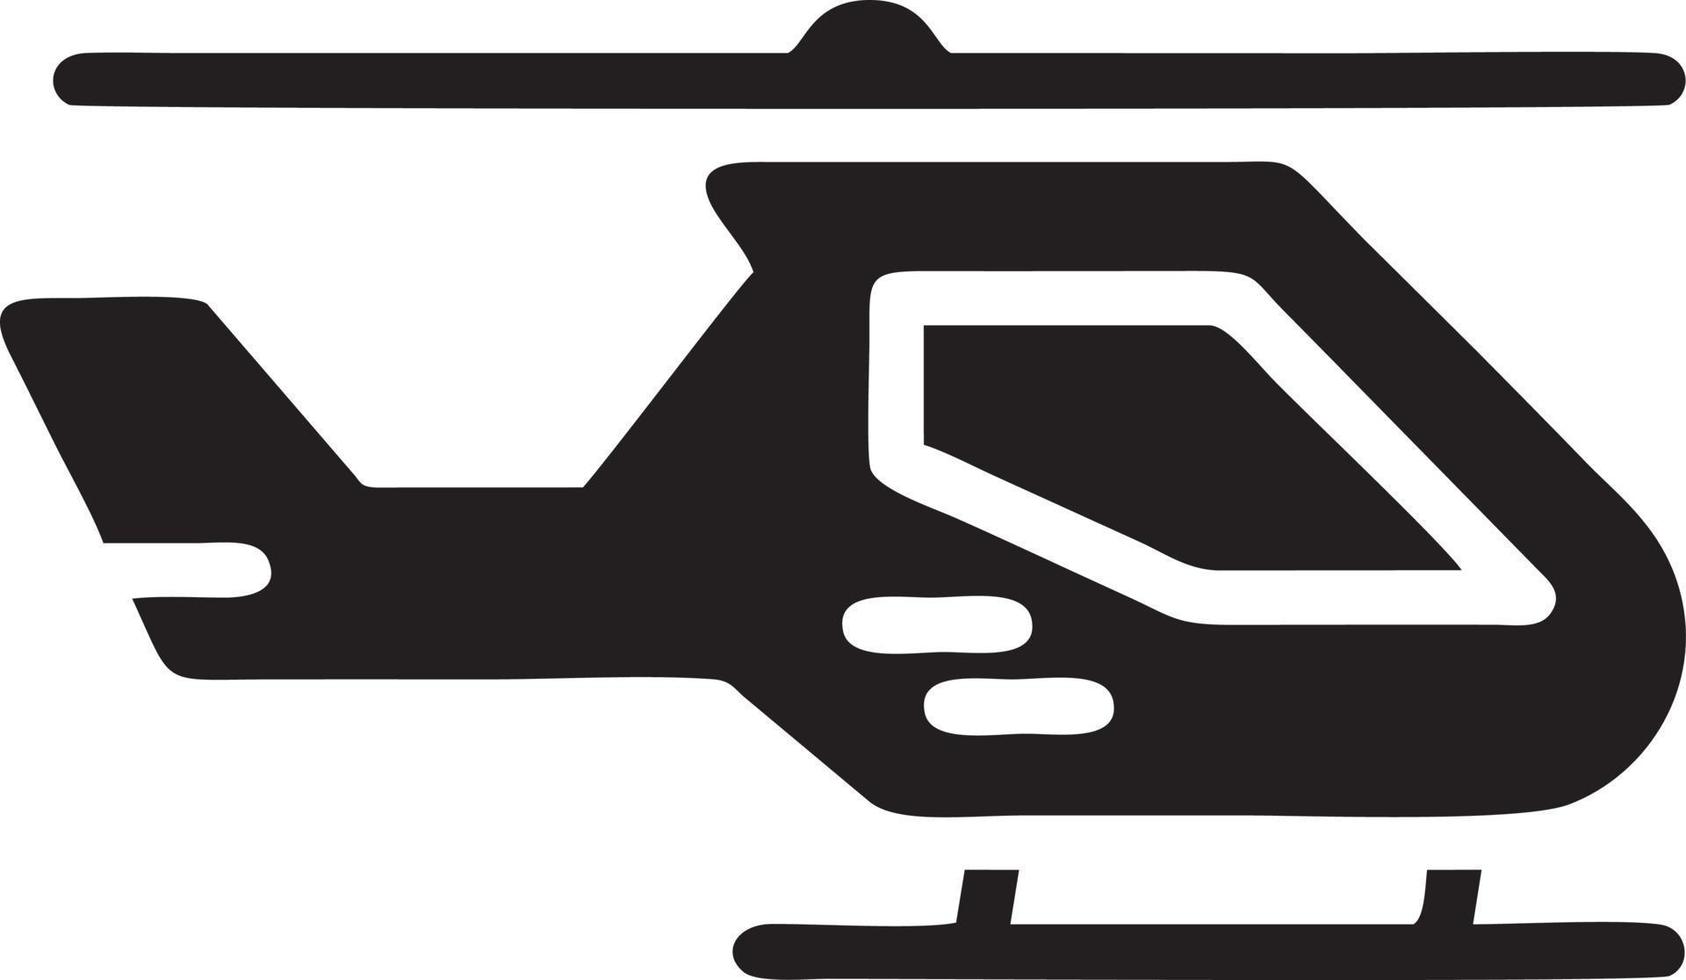 Helicopter icon symbol image vector, illustration of the flight aviation in black image. EPS 10 vector